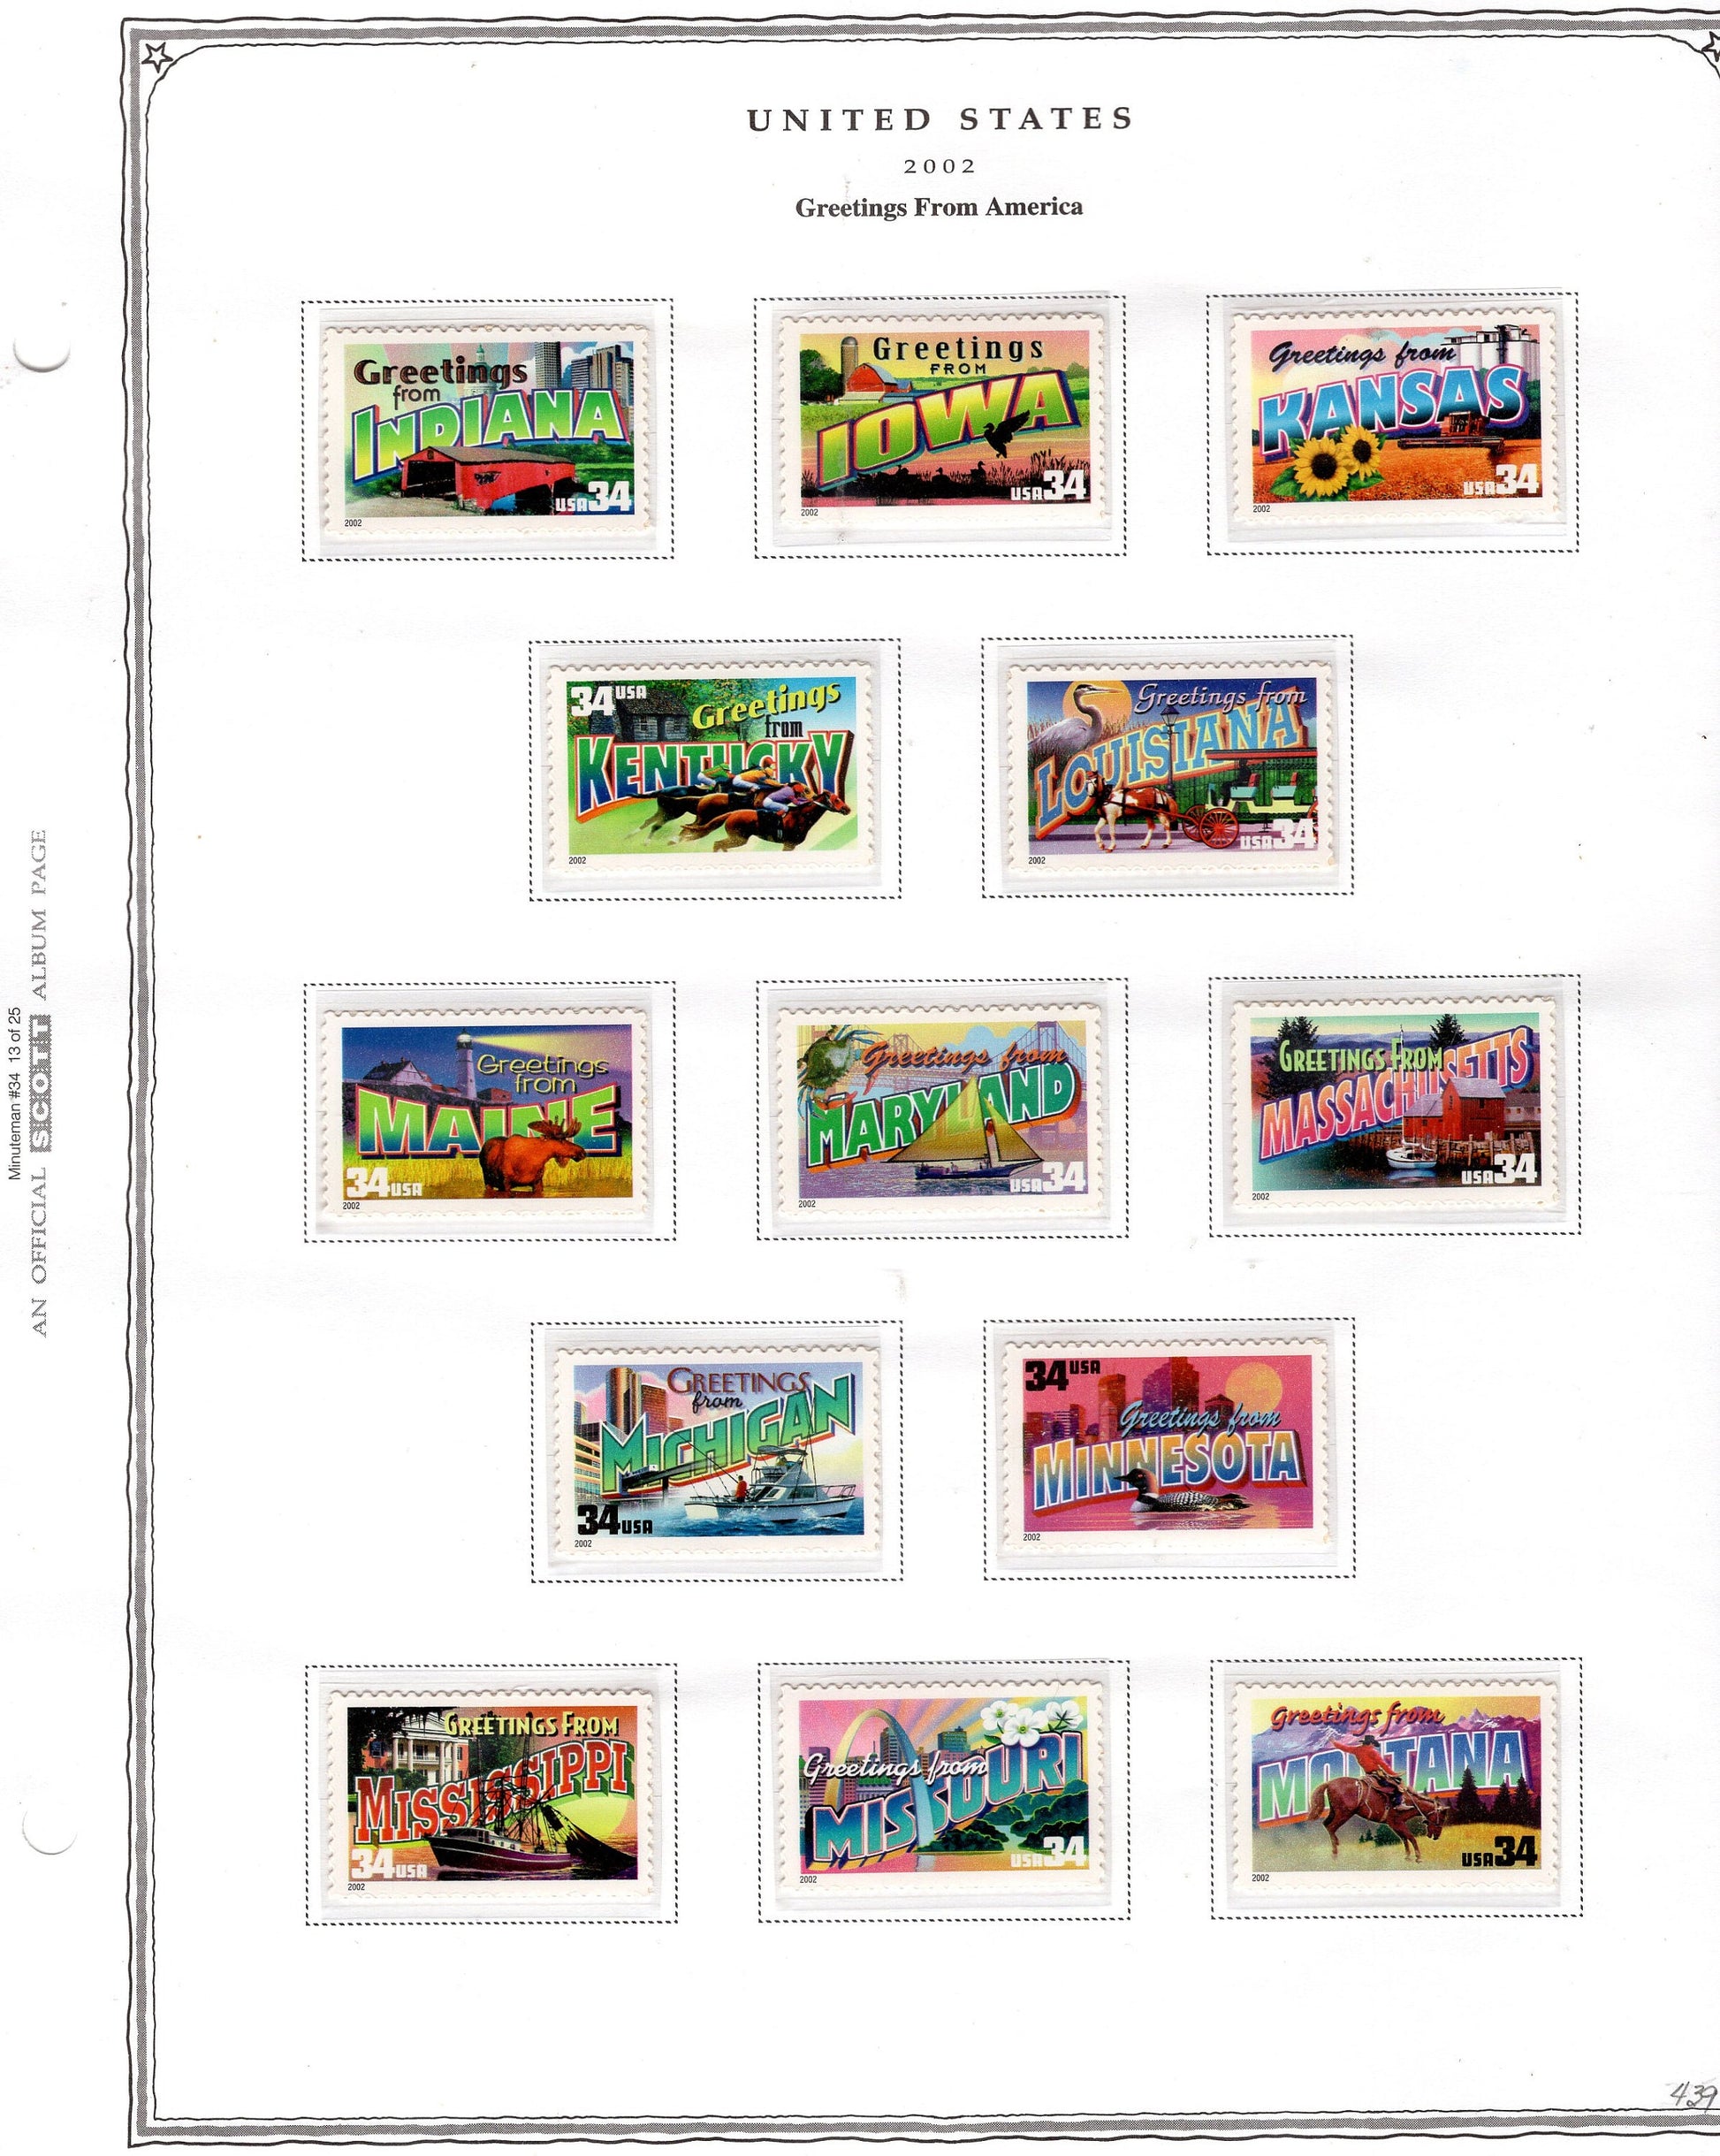 50 AMERICAN GREETINGS 34c Postcard Style Unused Fresh USA Postage Stamps - Issued in 2002 - s3561